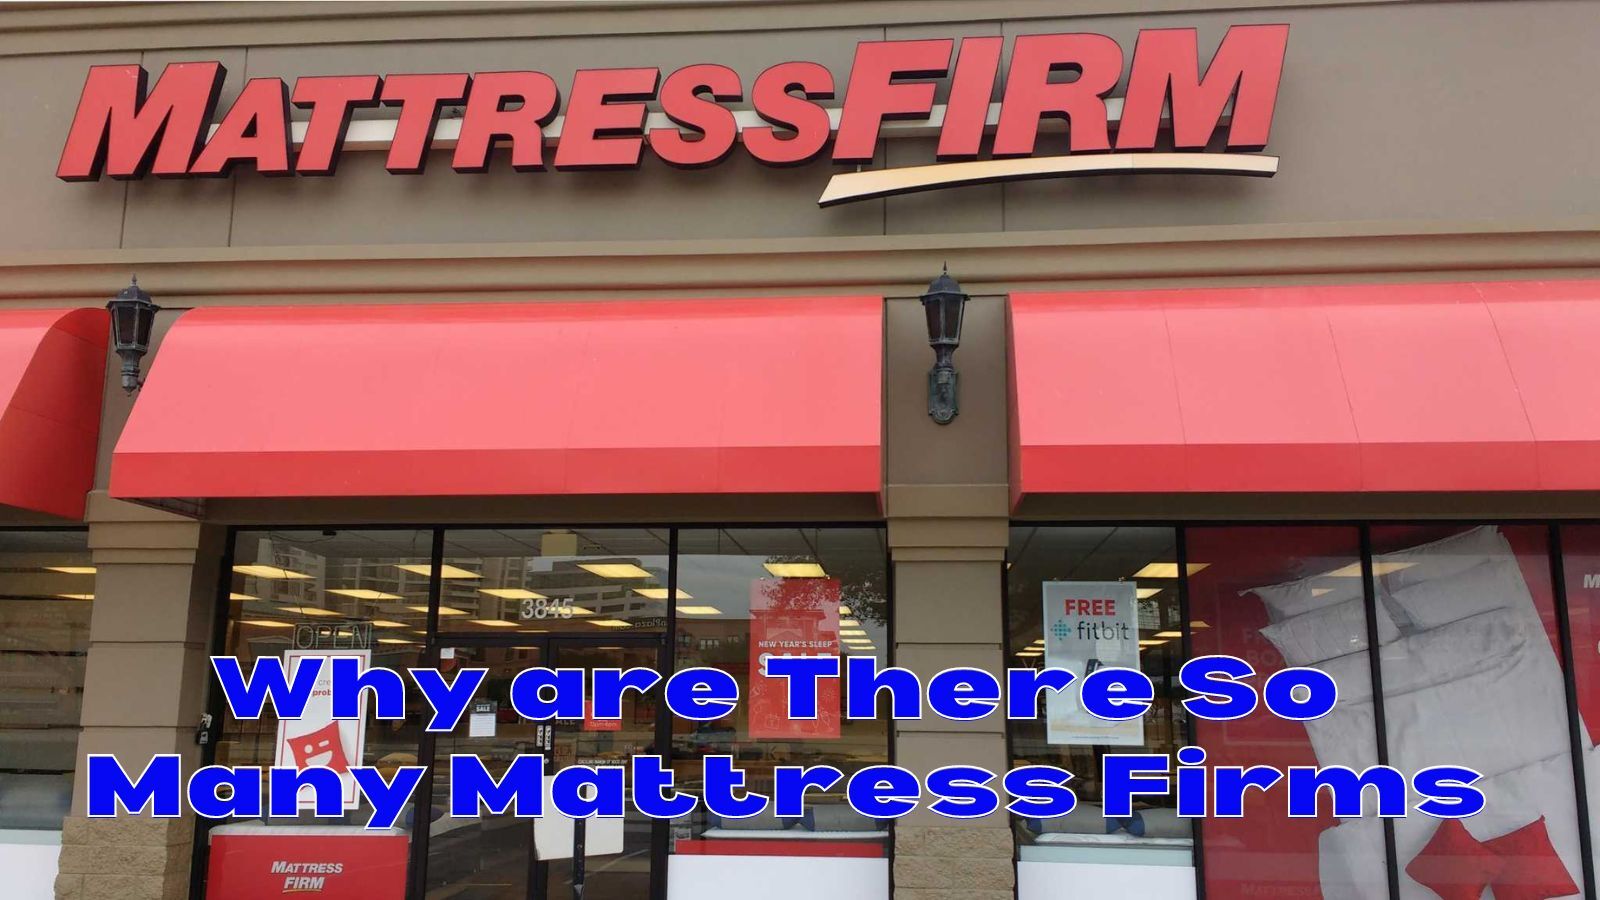 Why Are There So Many Mattress Firm Stores? 